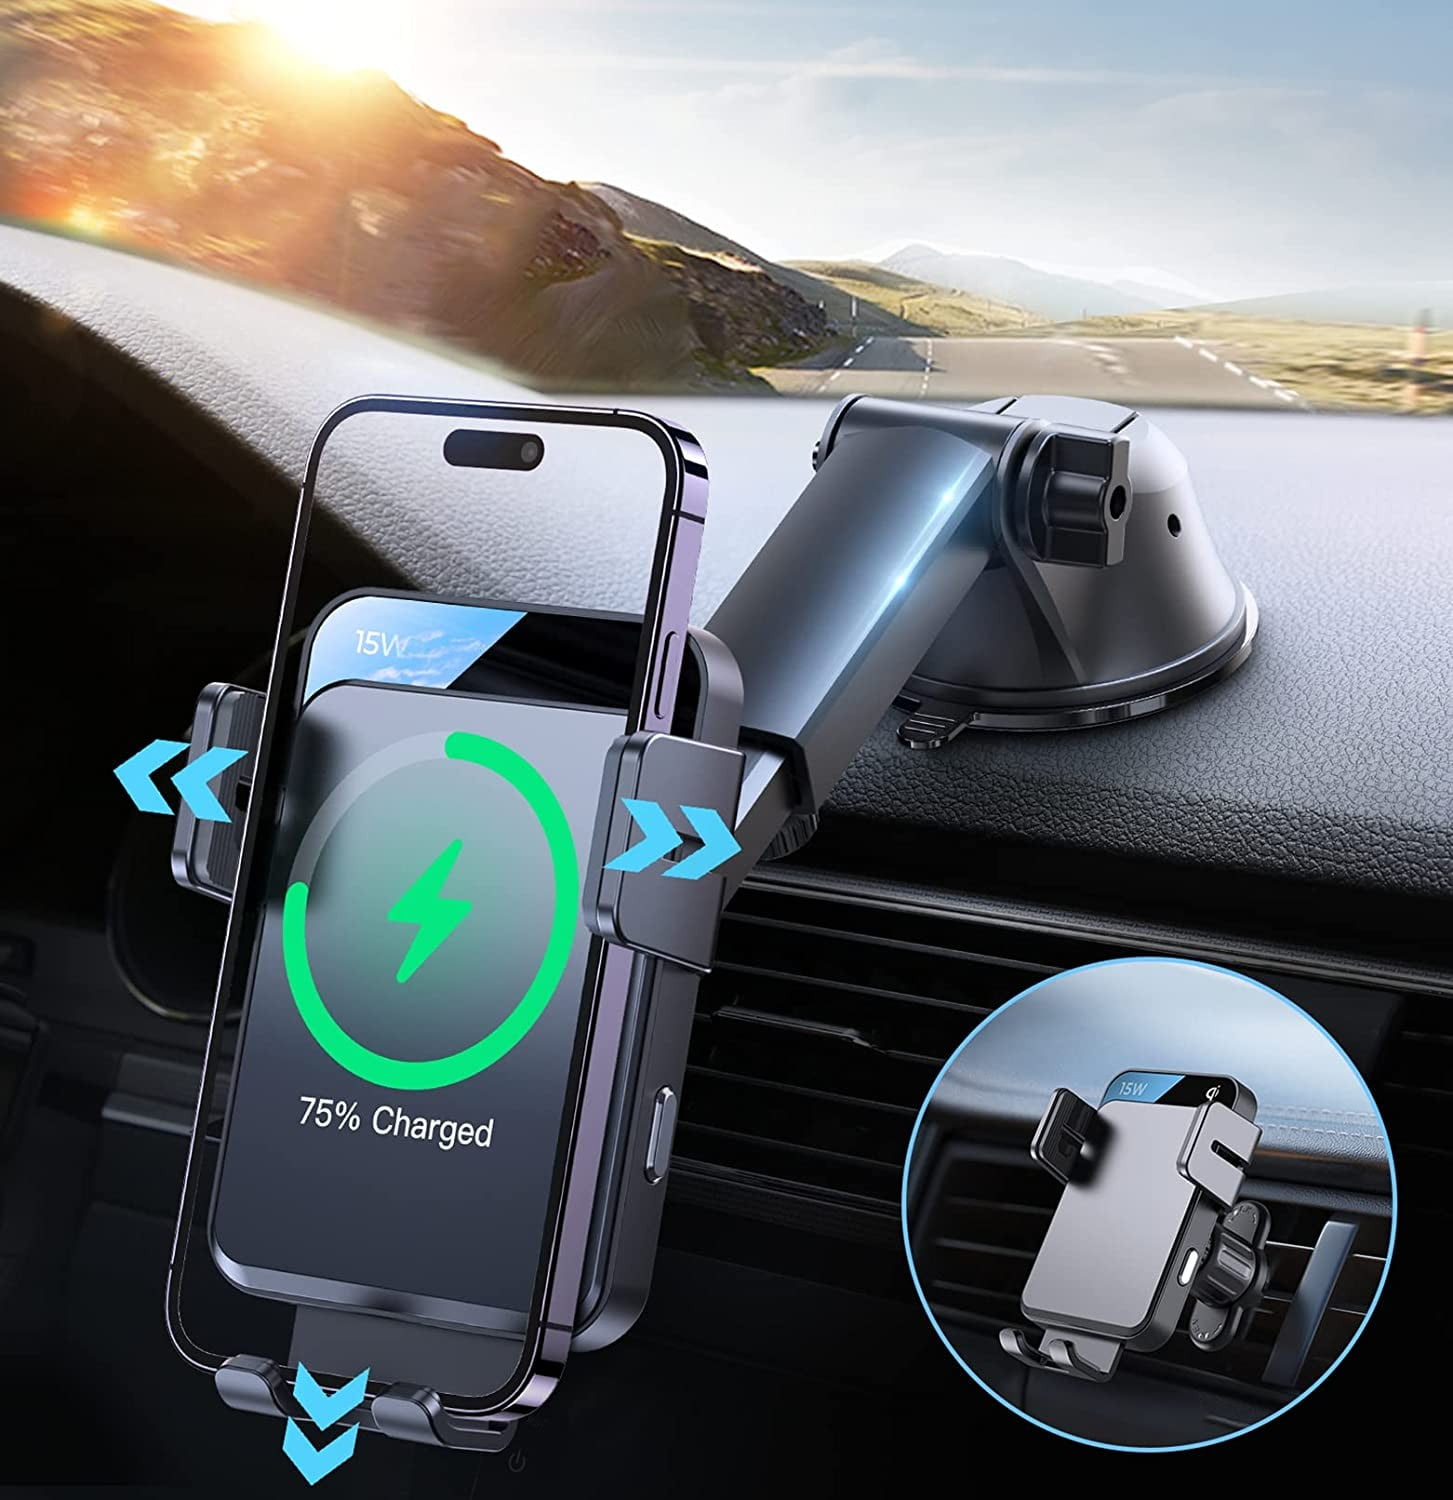 Ventev Wireless Qi Car Charging Kit with 3 Mounting Options - Sam's Club